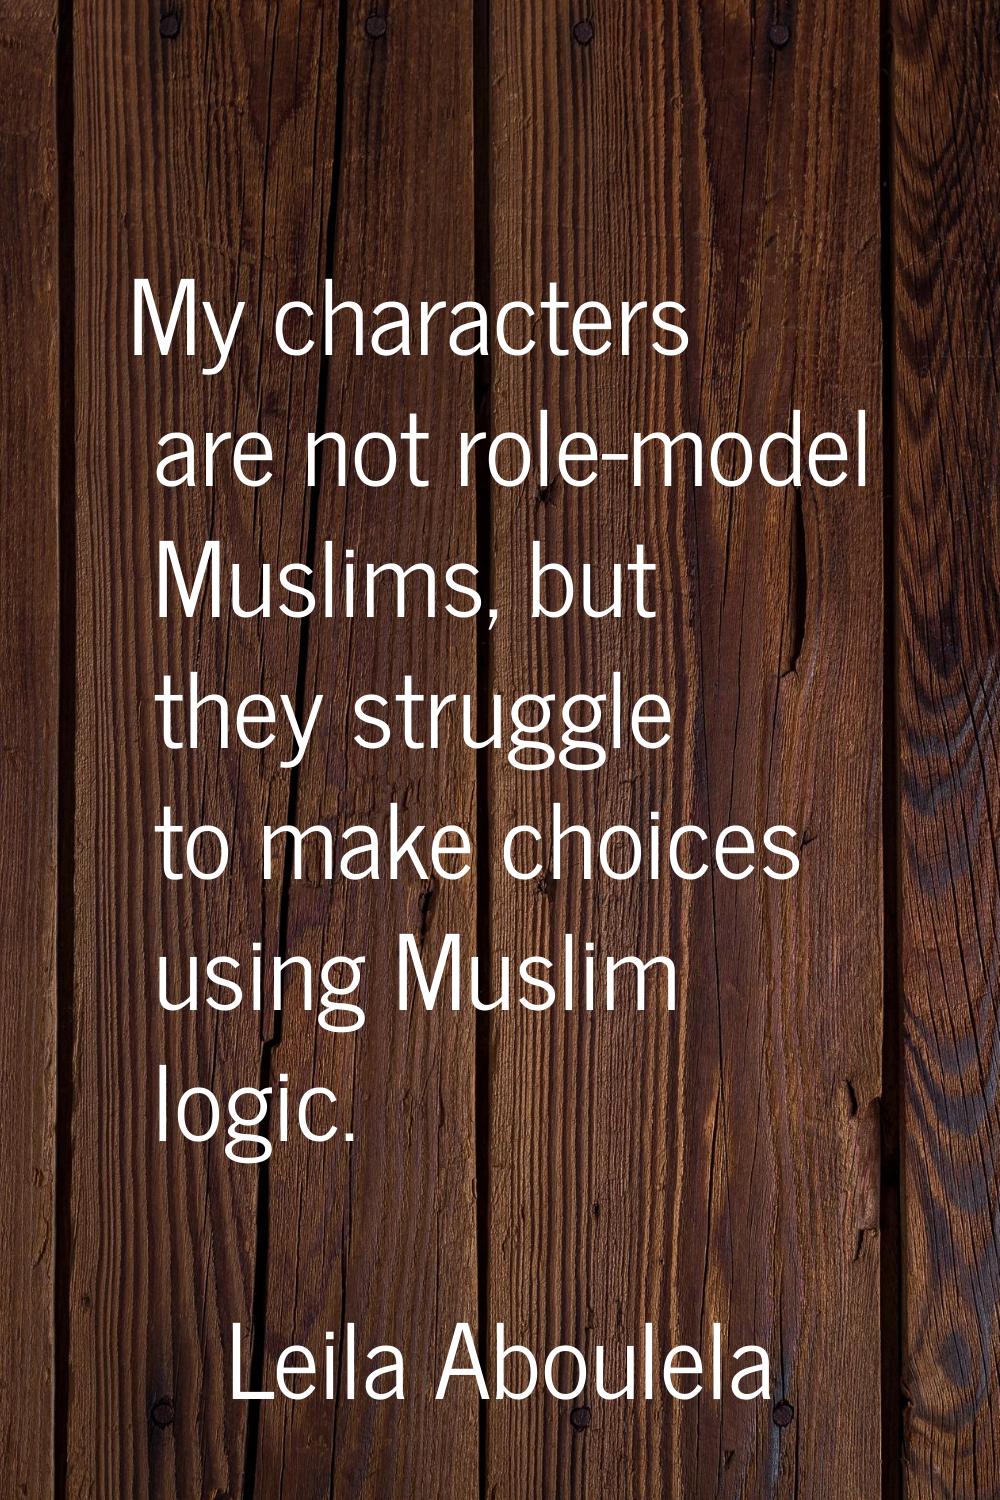 My characters are not role-model Muslims, but they struggle to make choices using Muslim logic.